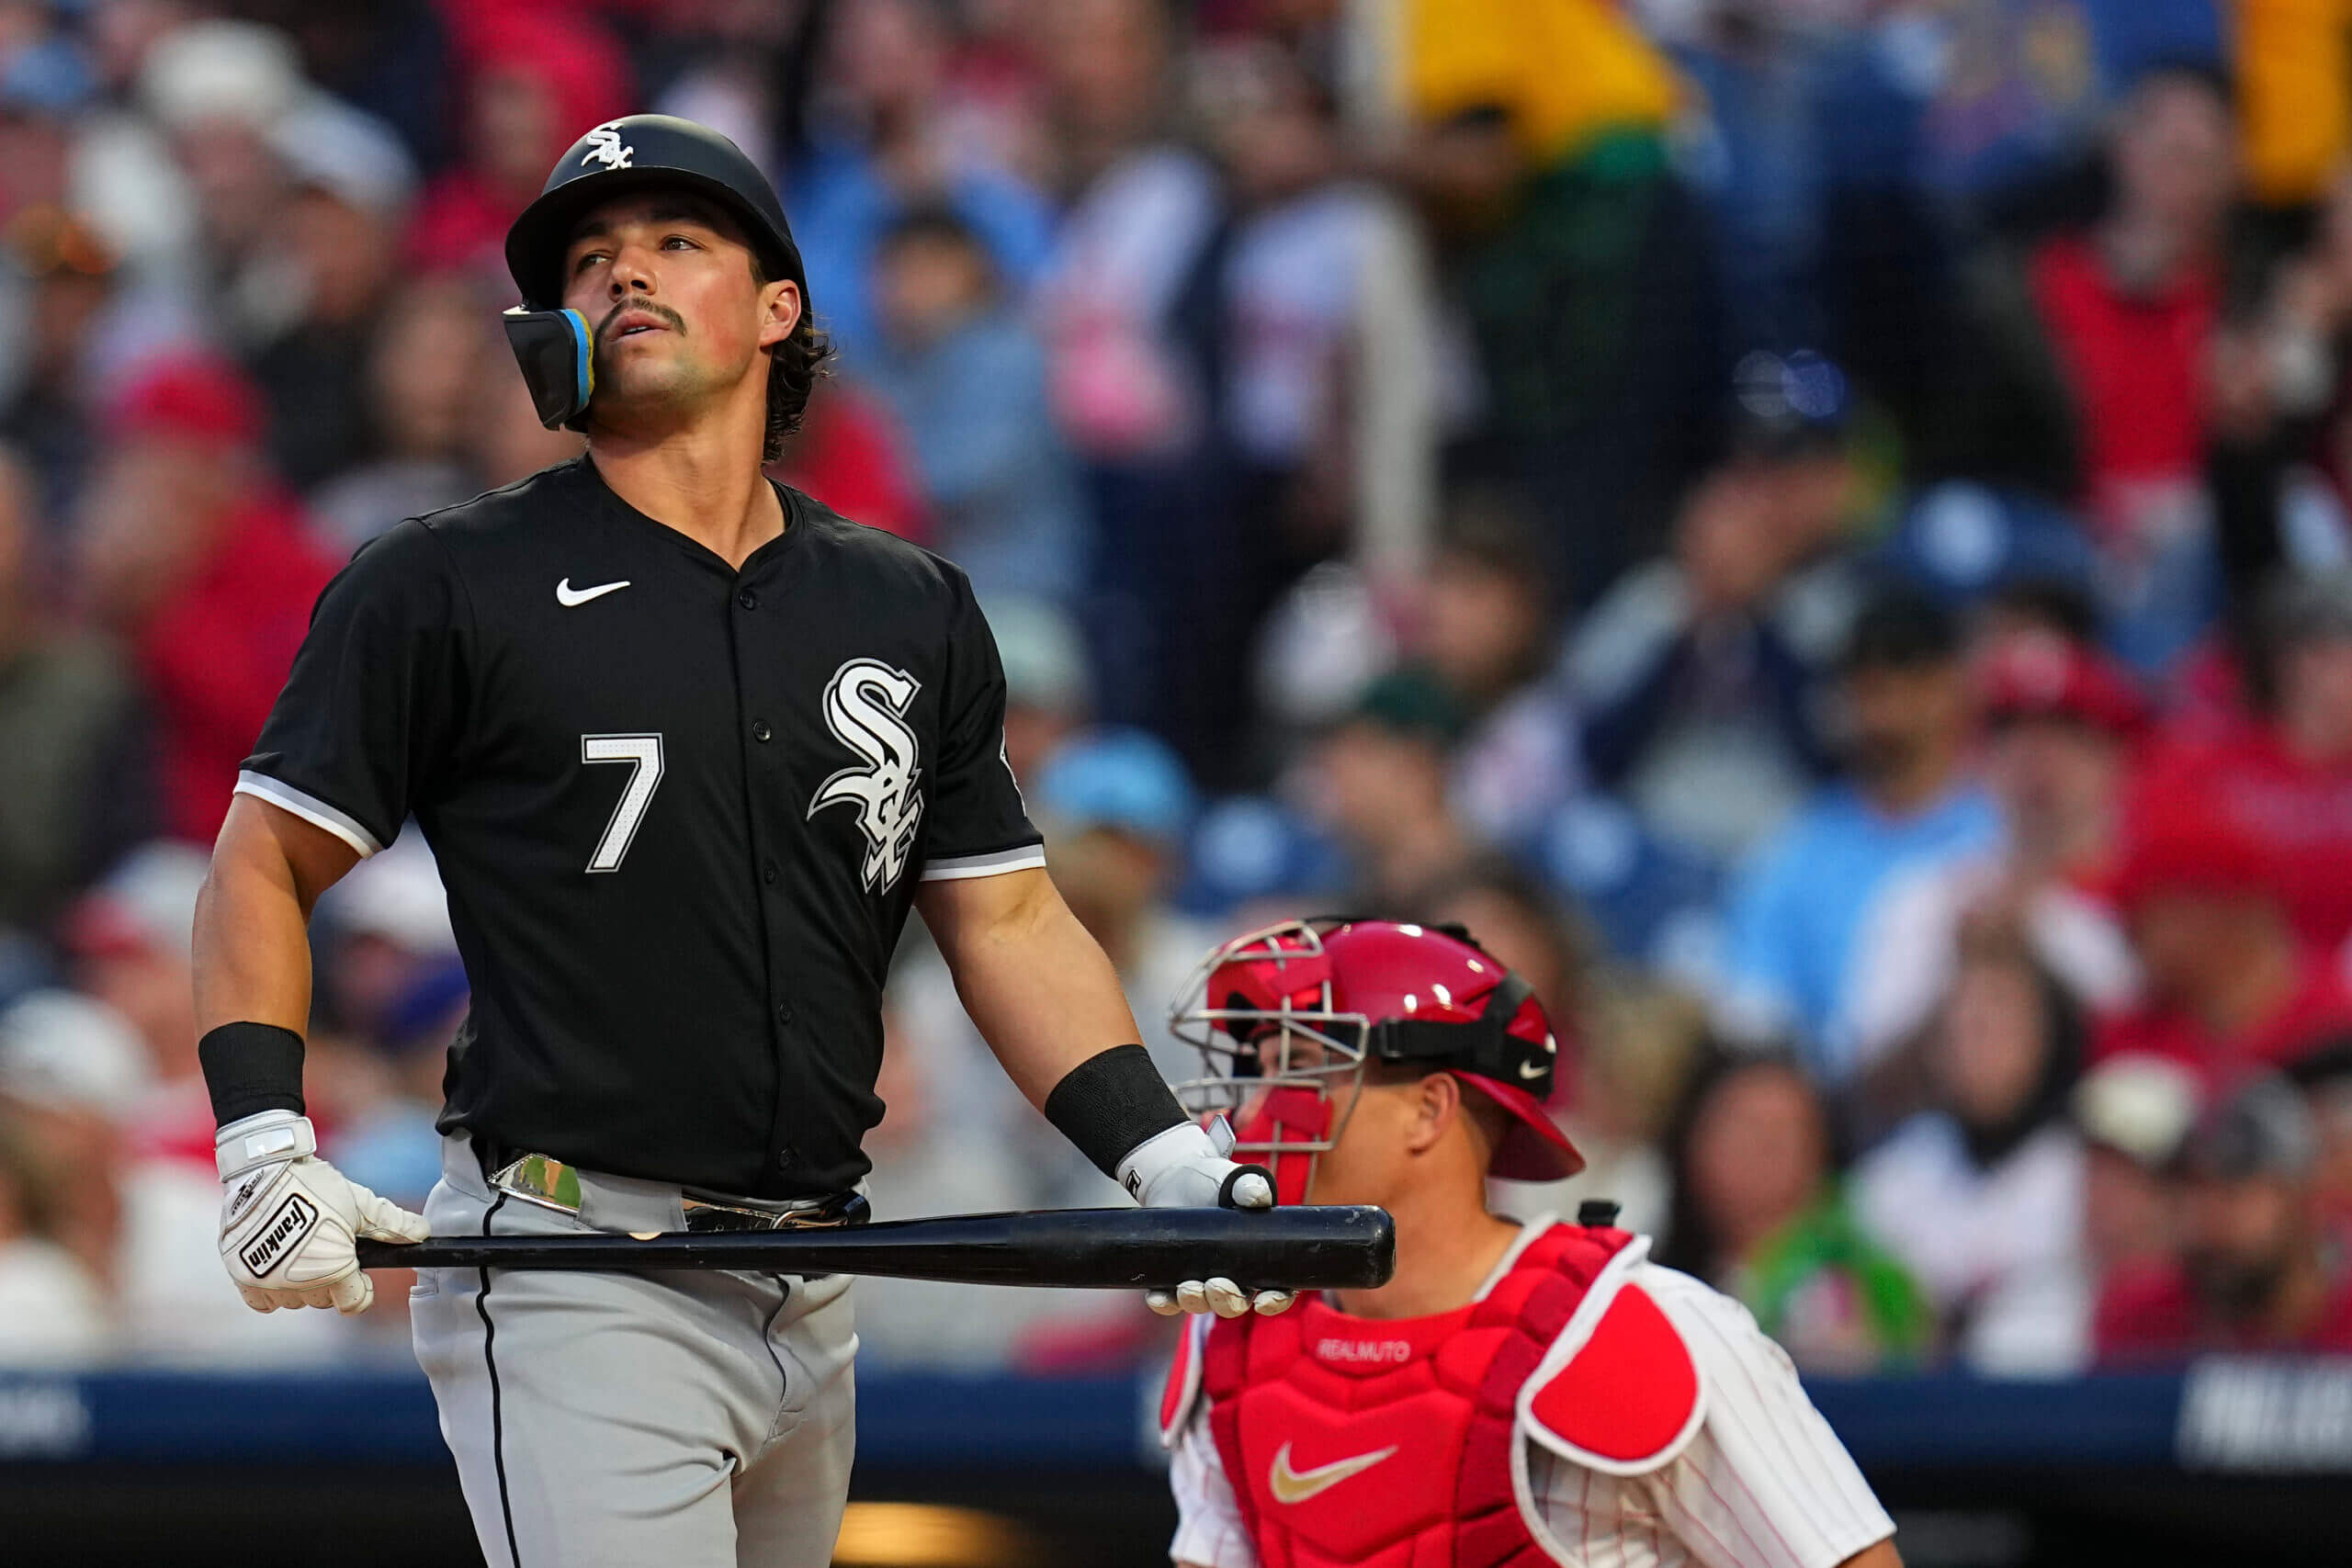 The 10 biggest disappointments of the young MLB season: bad umps, worse White Sox, A’s to Sacramento